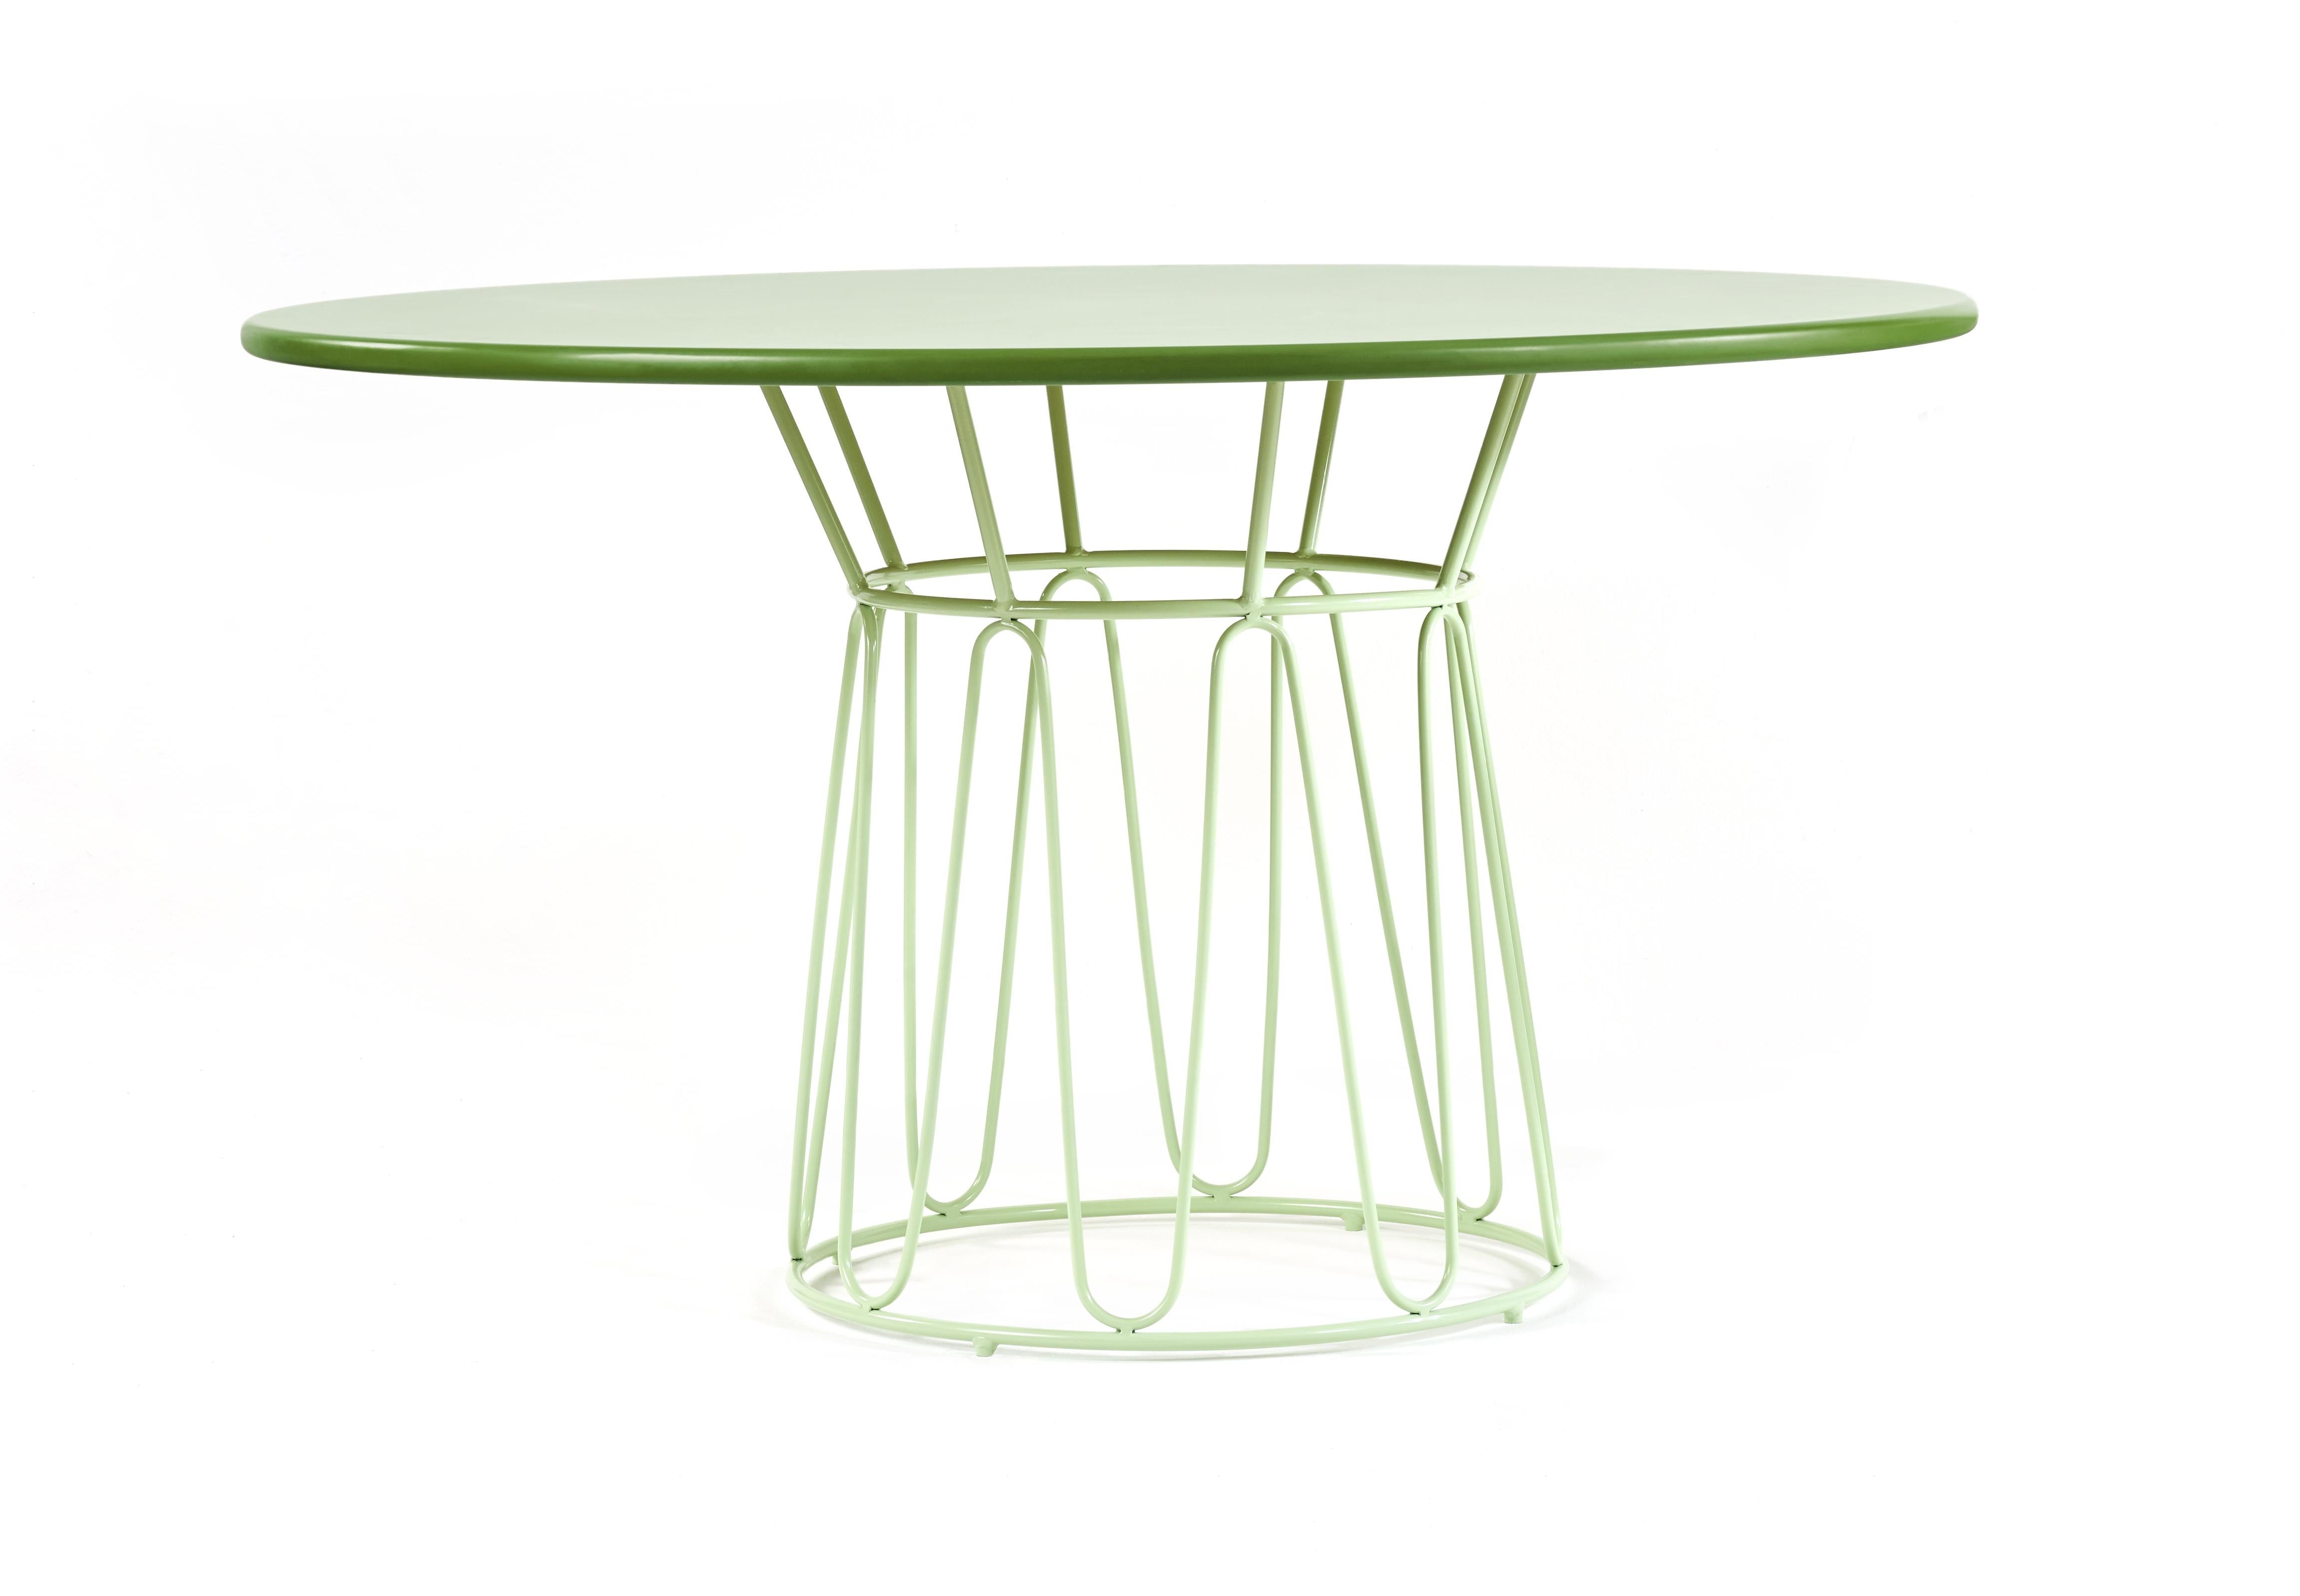 Circo dining table by Sebastian Herkner
Materials: Galvanized and powder-coated tubular steel. Aluminum top. 
Technique: Weaved by local craftspeople in Colombia. 
Dimensions: 
Top Diameter 135 cm 
Base Diameter 59 x H 77.5 cm
Available in